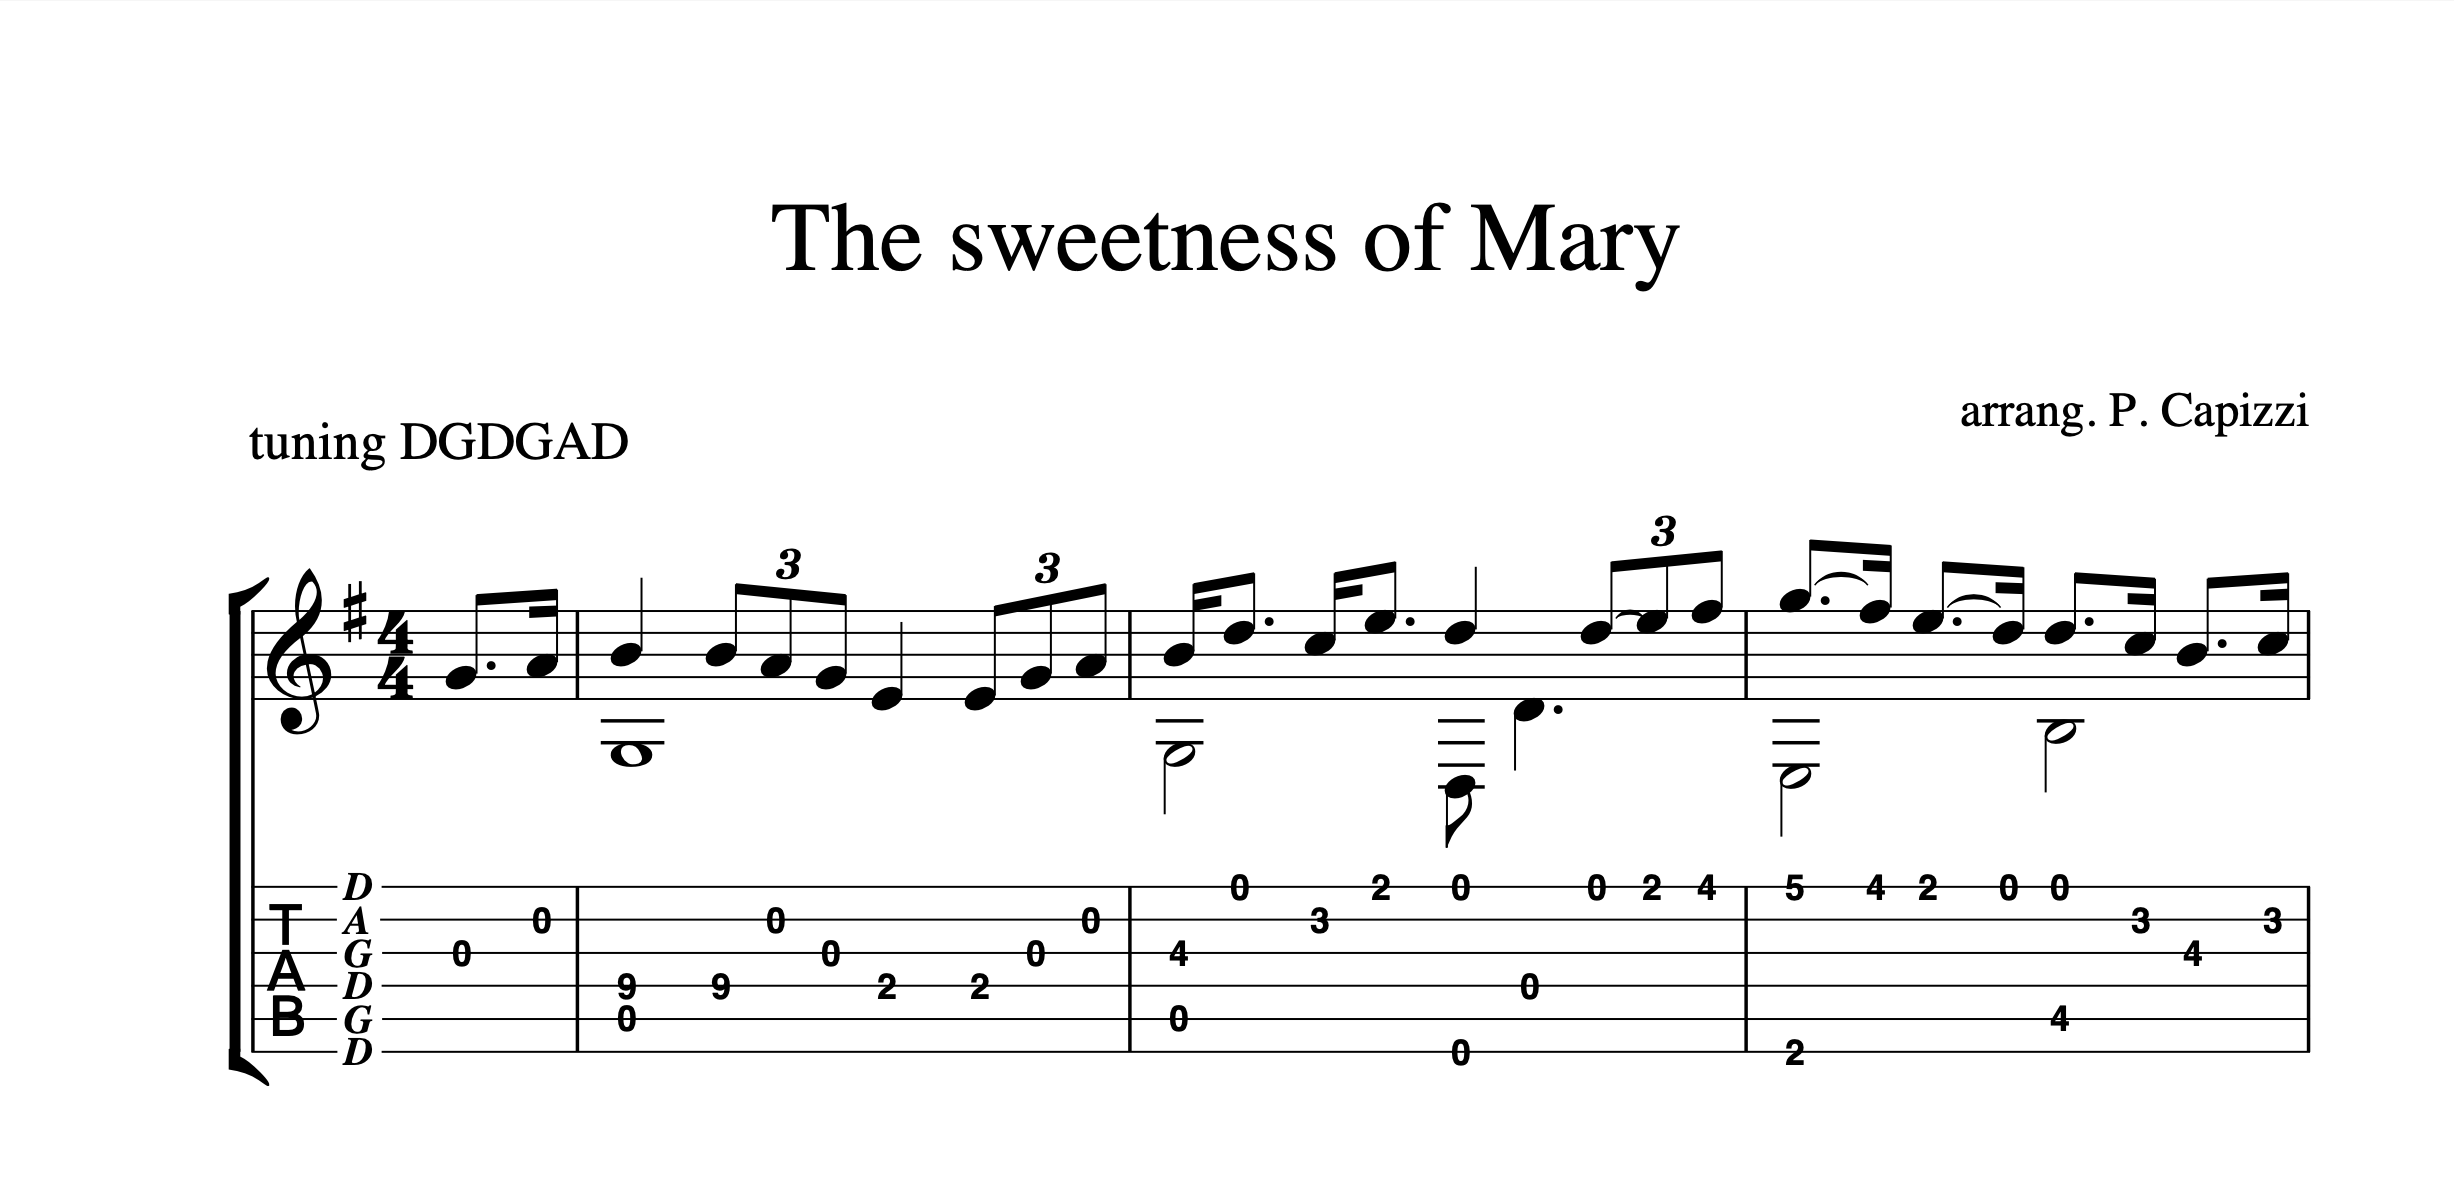 The sweetness of Mary